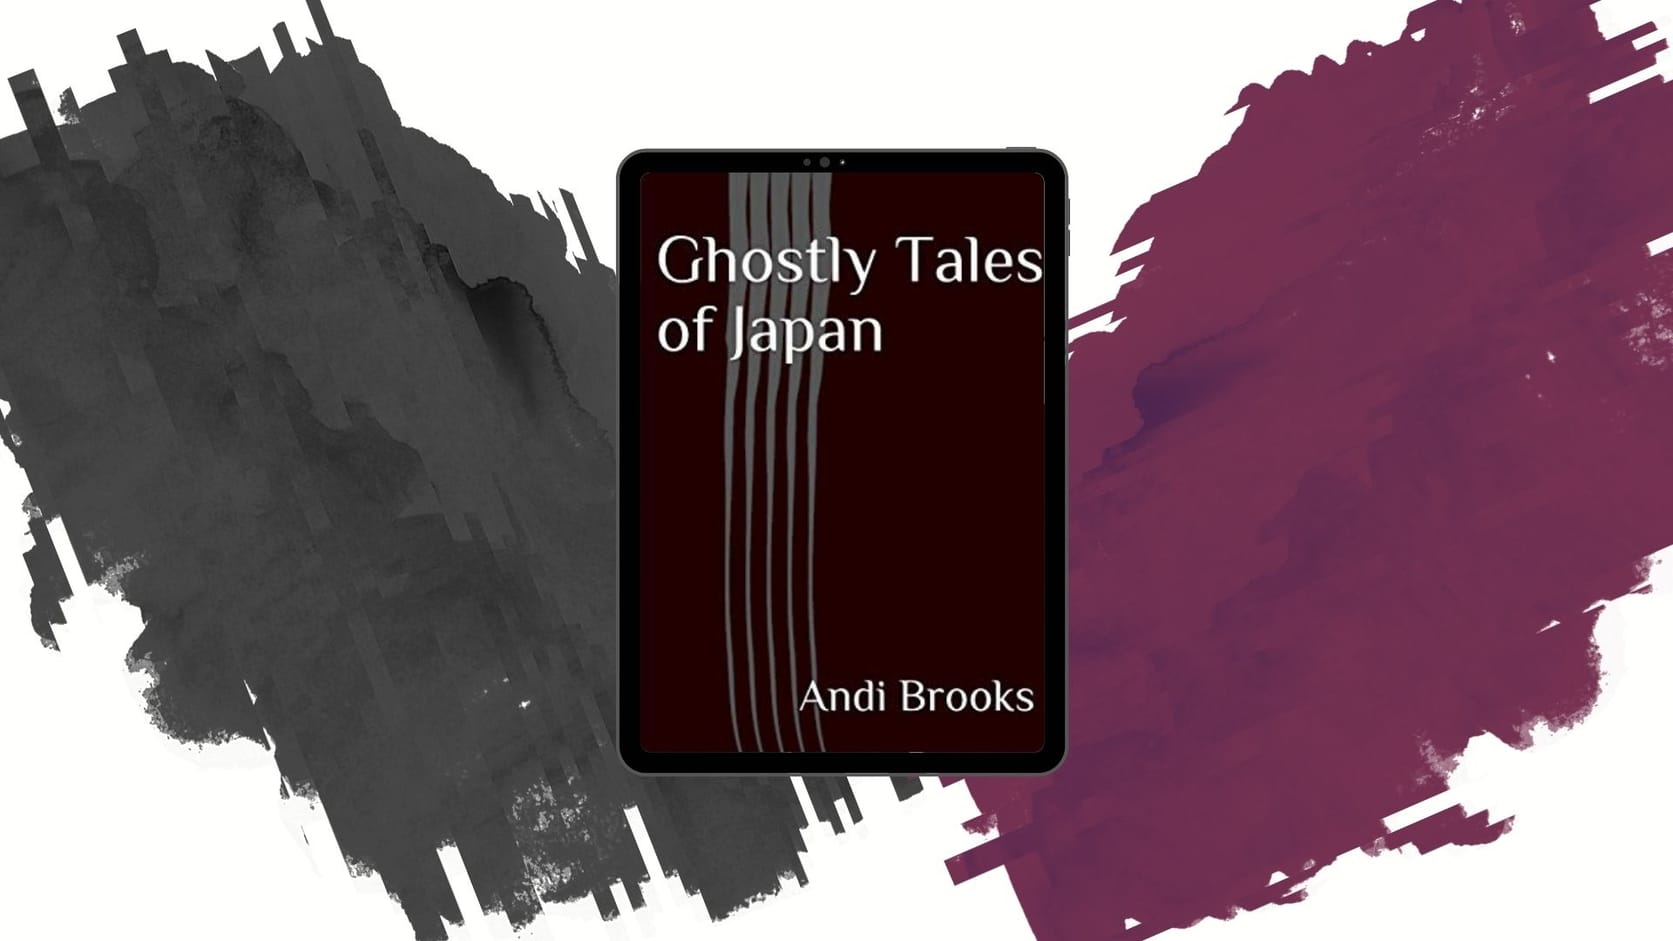 Andi Brooks’ “Ghostly Tales of Japan” Delivers Spine-chilling, Yokai-filled Flash Fiction